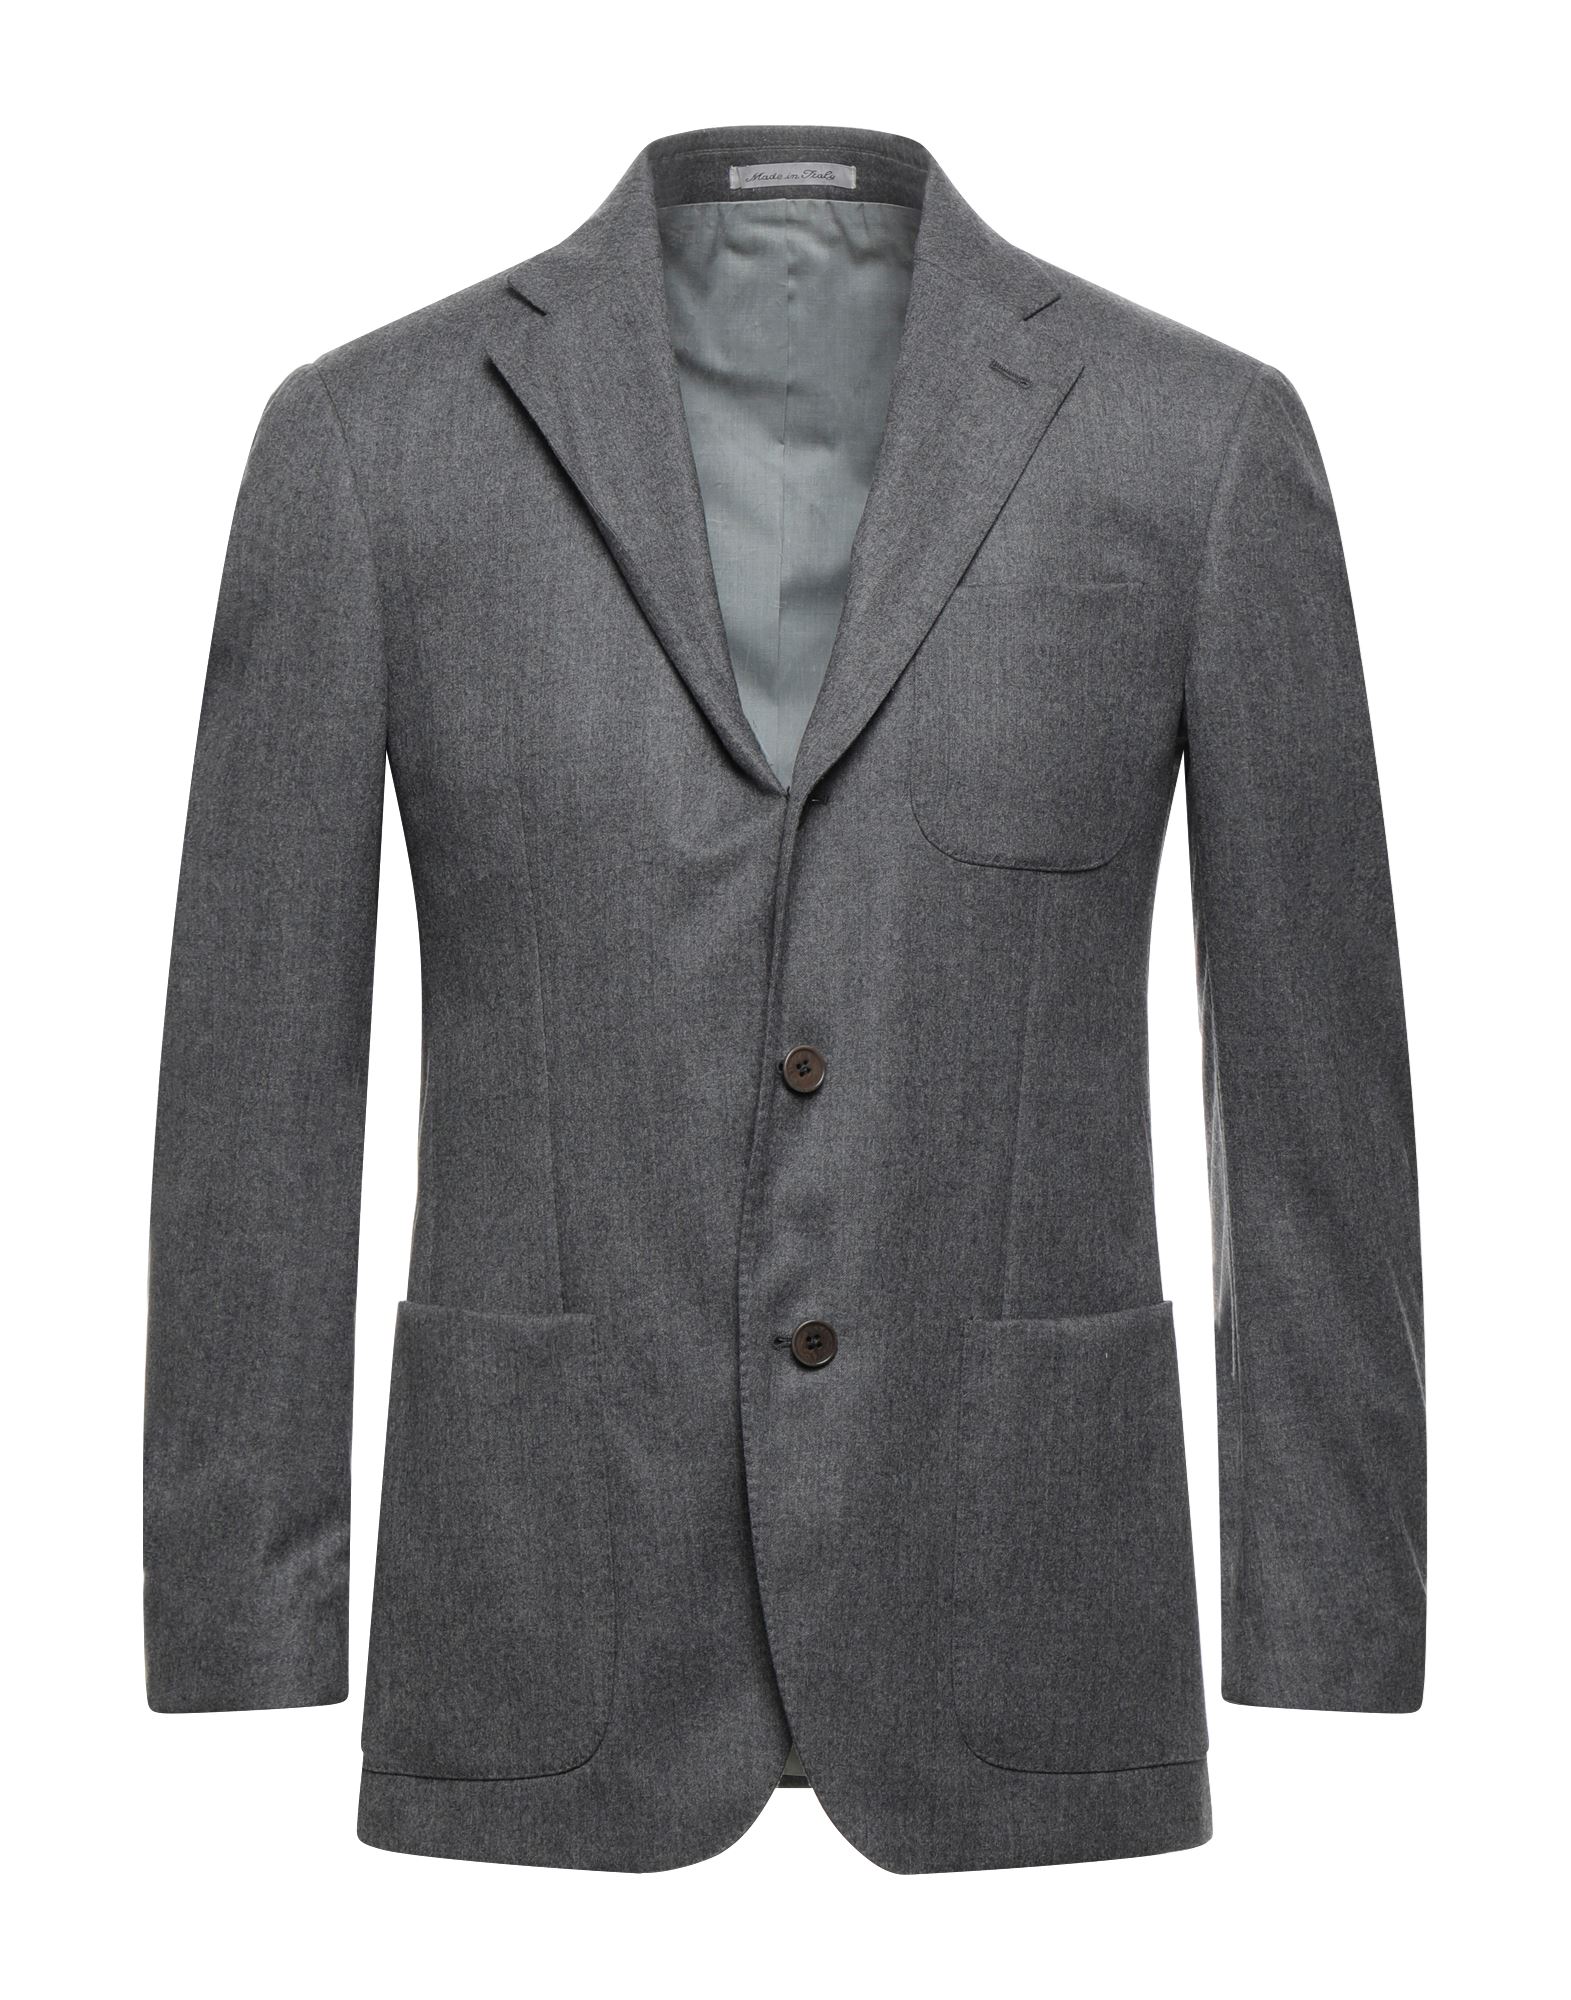 Absolute Light Jacket By Cantarelli Suit Jackets In Grey